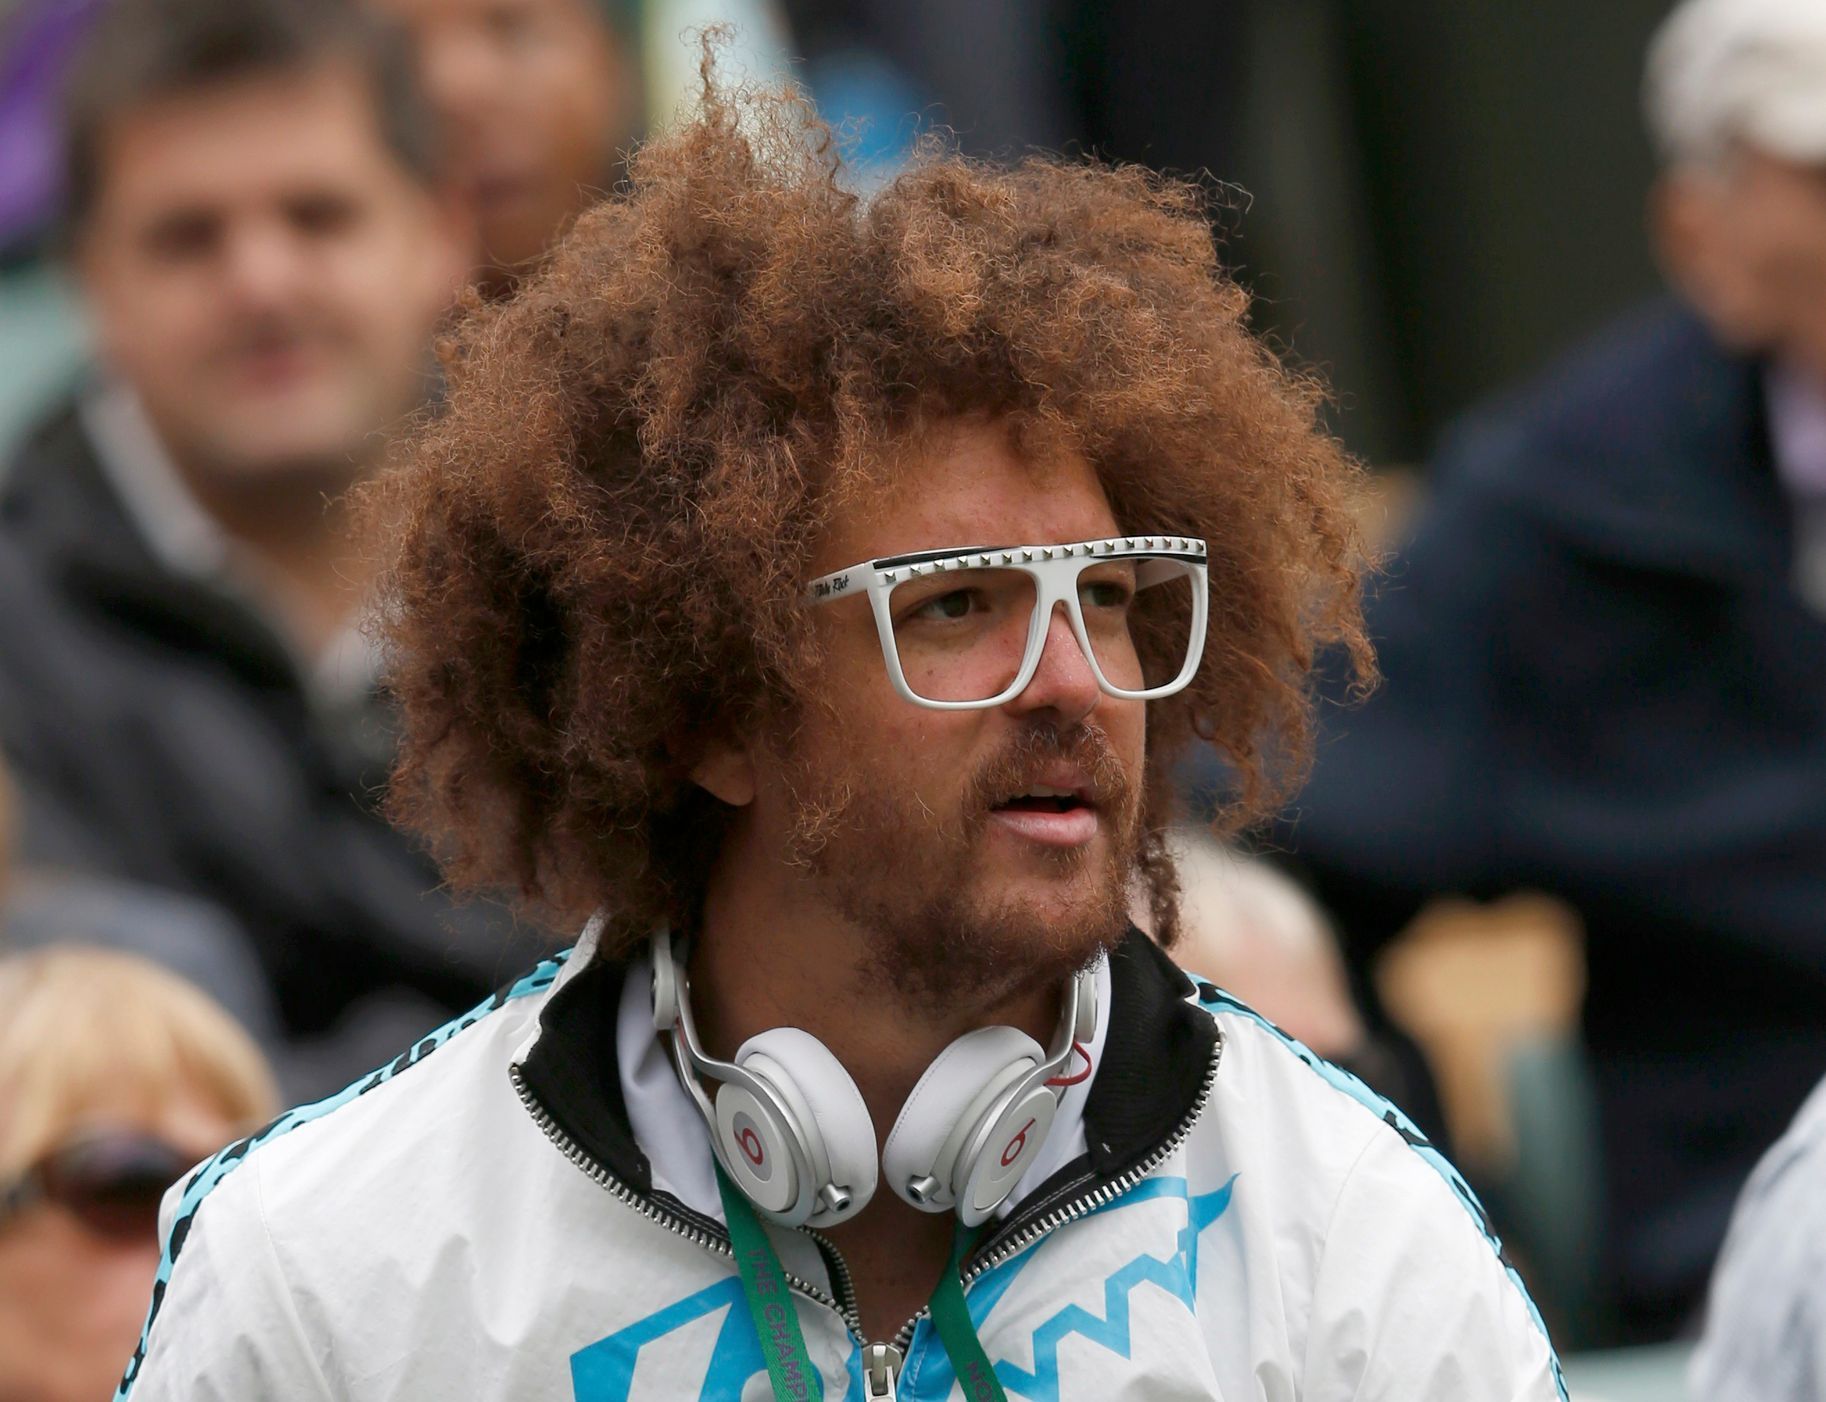 Stefan Kendal Gordy, known as Redfoo, of the band LMFAO, wat